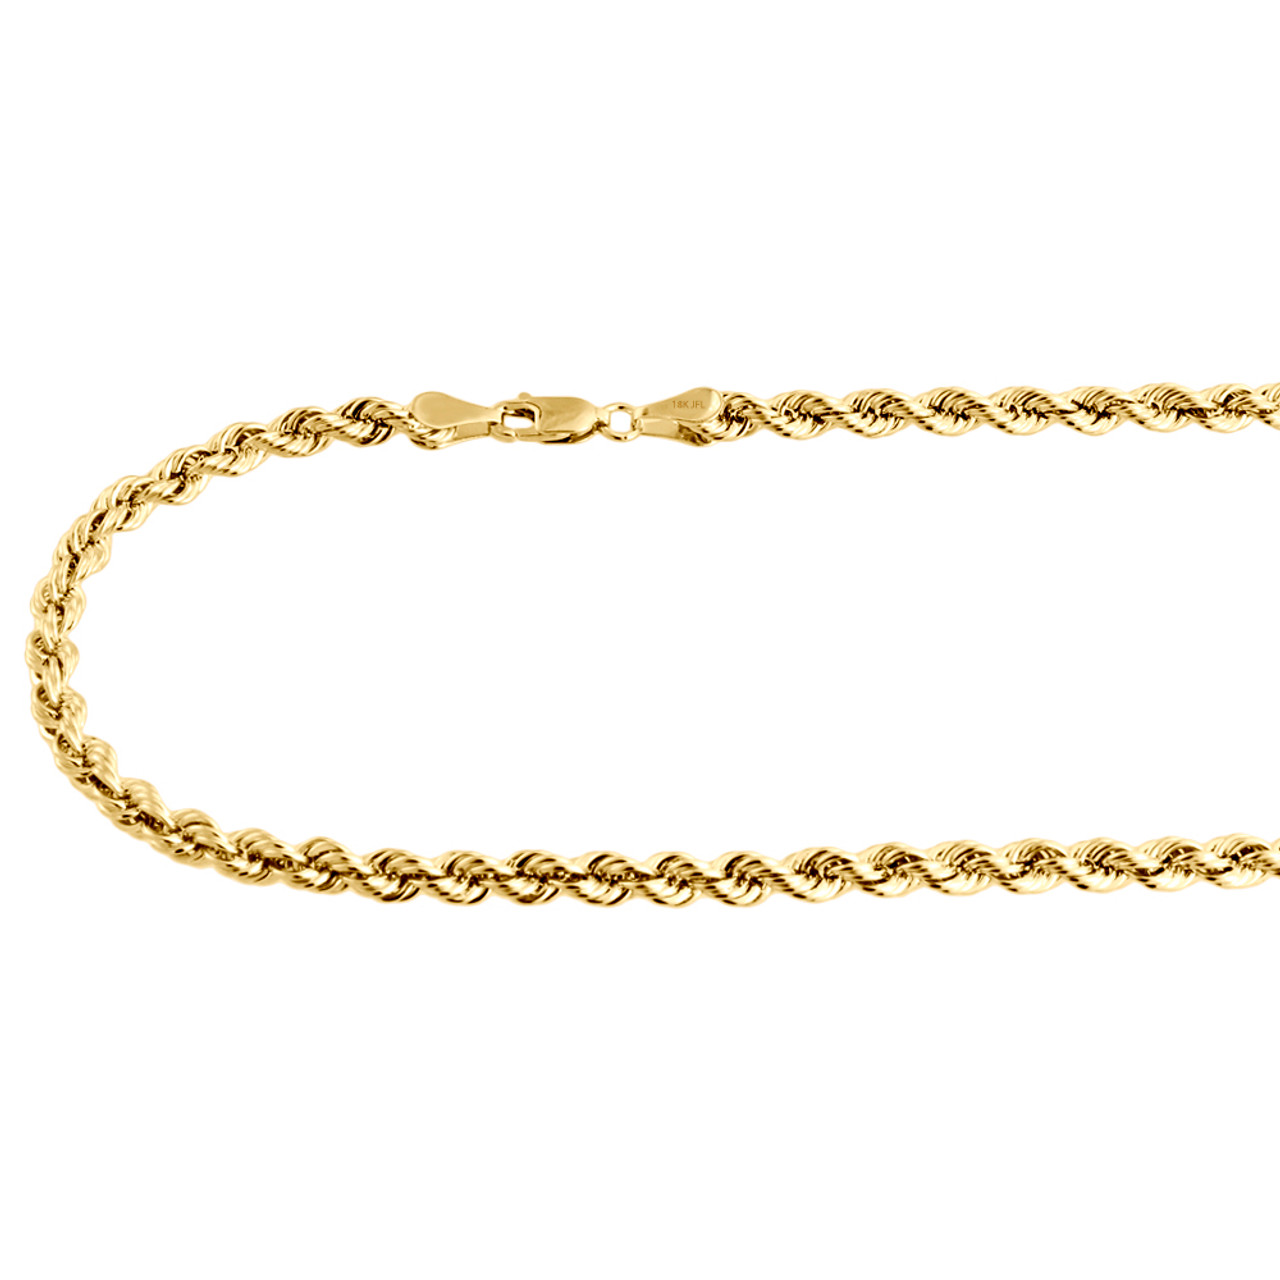 18K Real Gold Plated Rope Chain, 4mm Twist Chain Necklace for Men Women 24 inch, Adult Unisex, Size: One Size